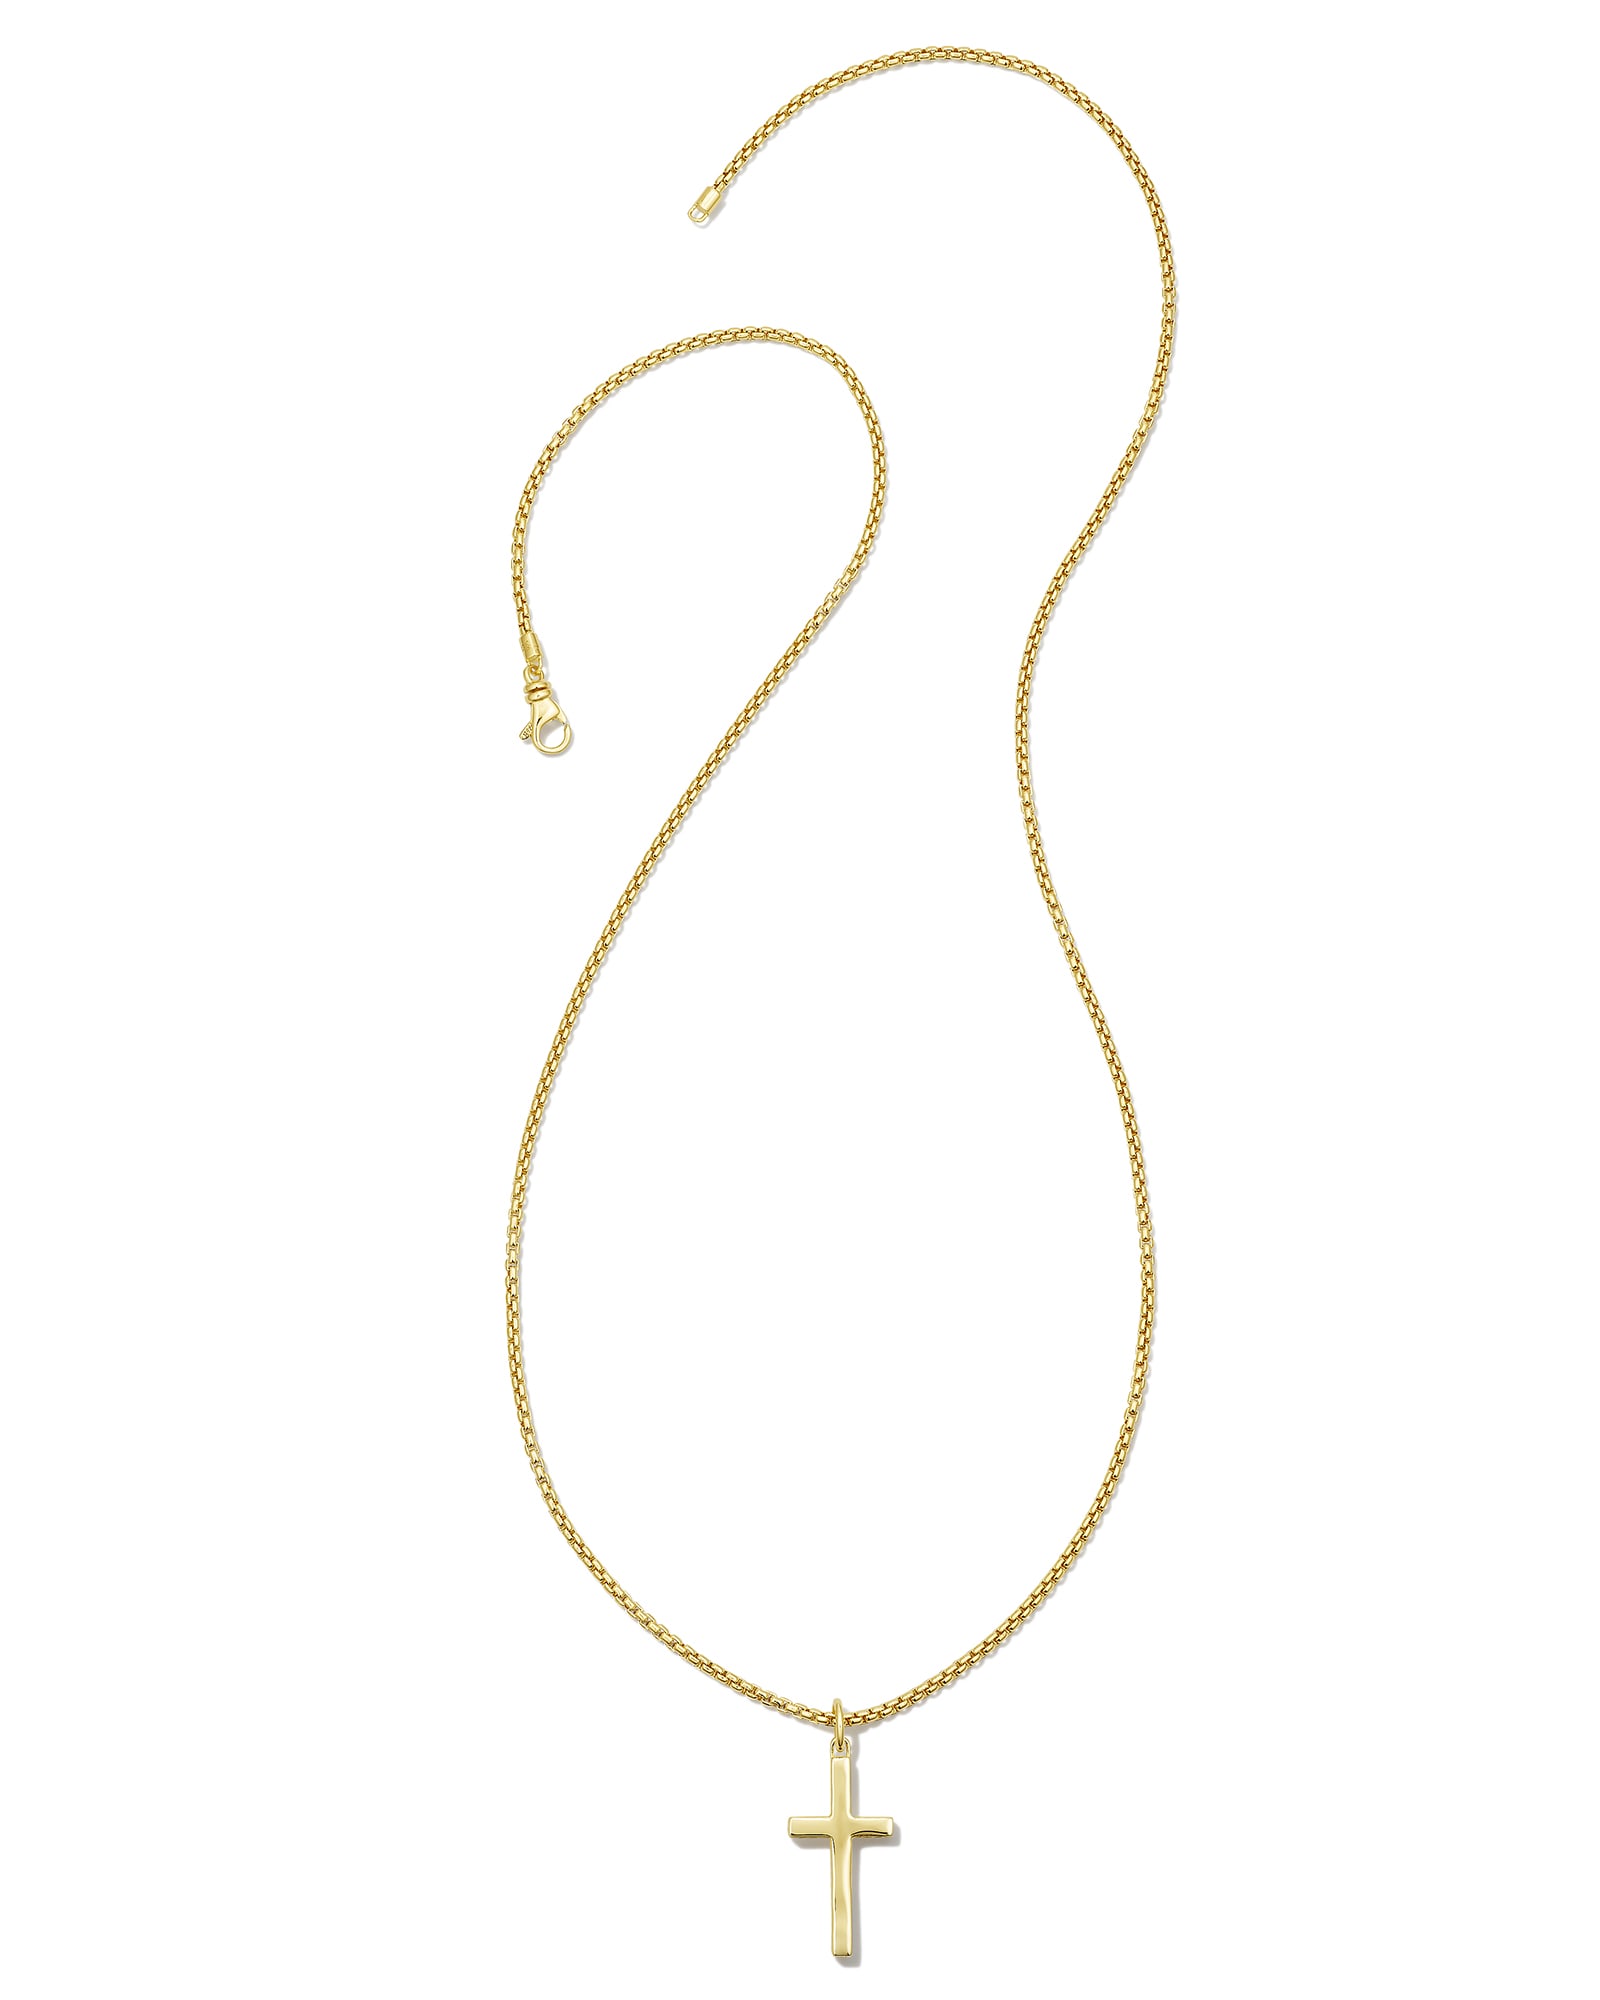 Small Cross Charm Necklace in 18k Gold Vermeil